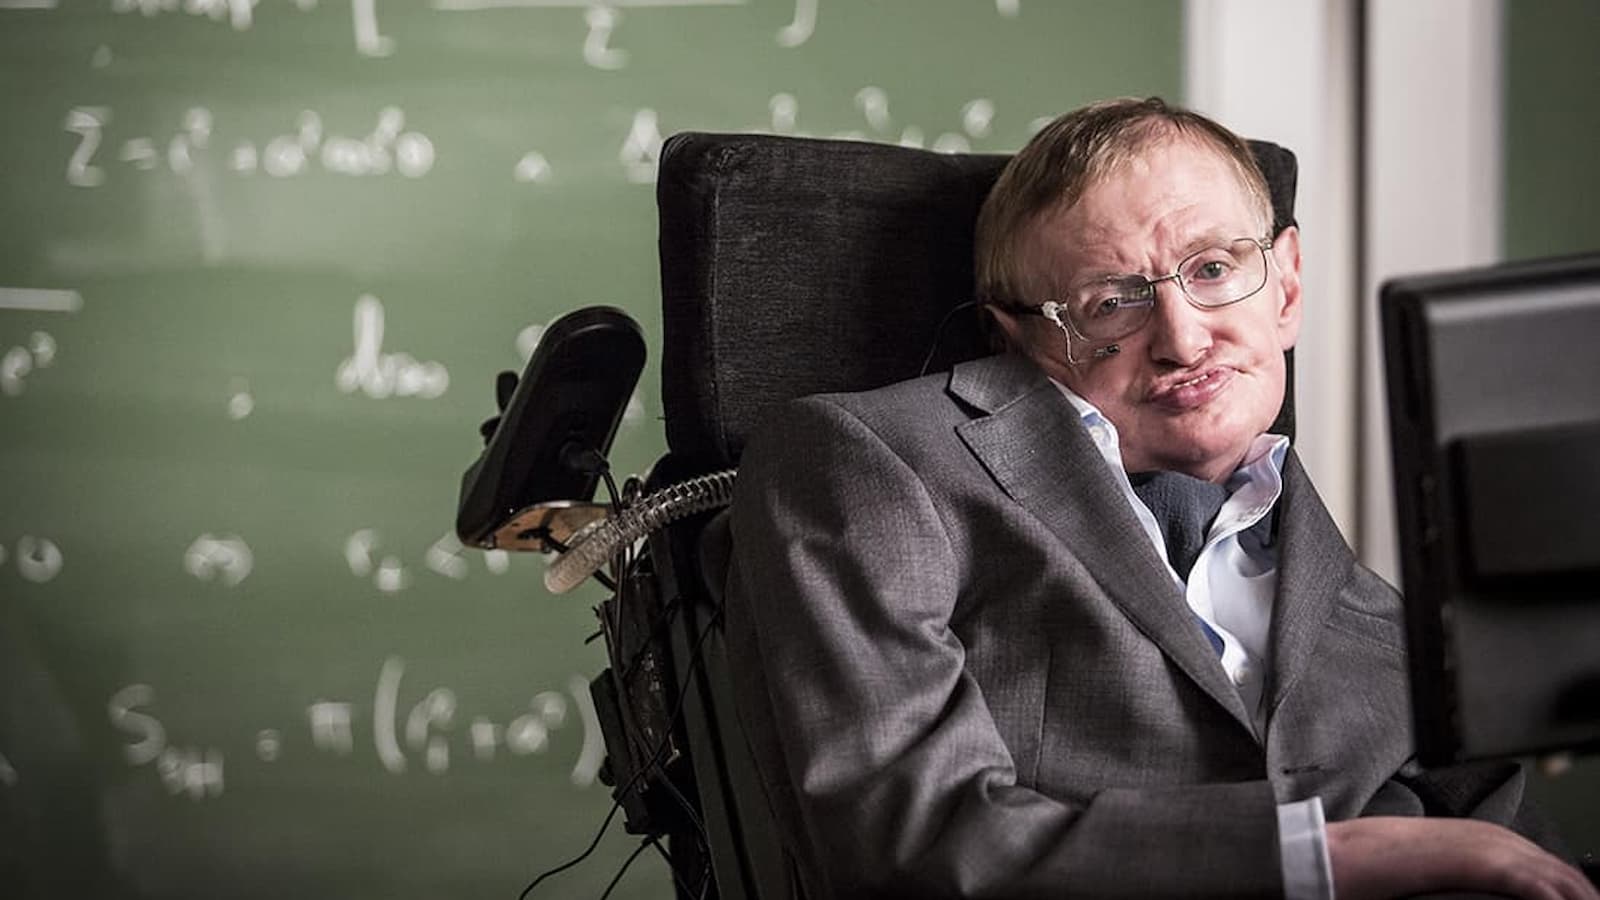 Stephen Hawking Biography: Age, Height, Birthday, Scientific Achievements, Best-selling books, Personal Life, Net Worth